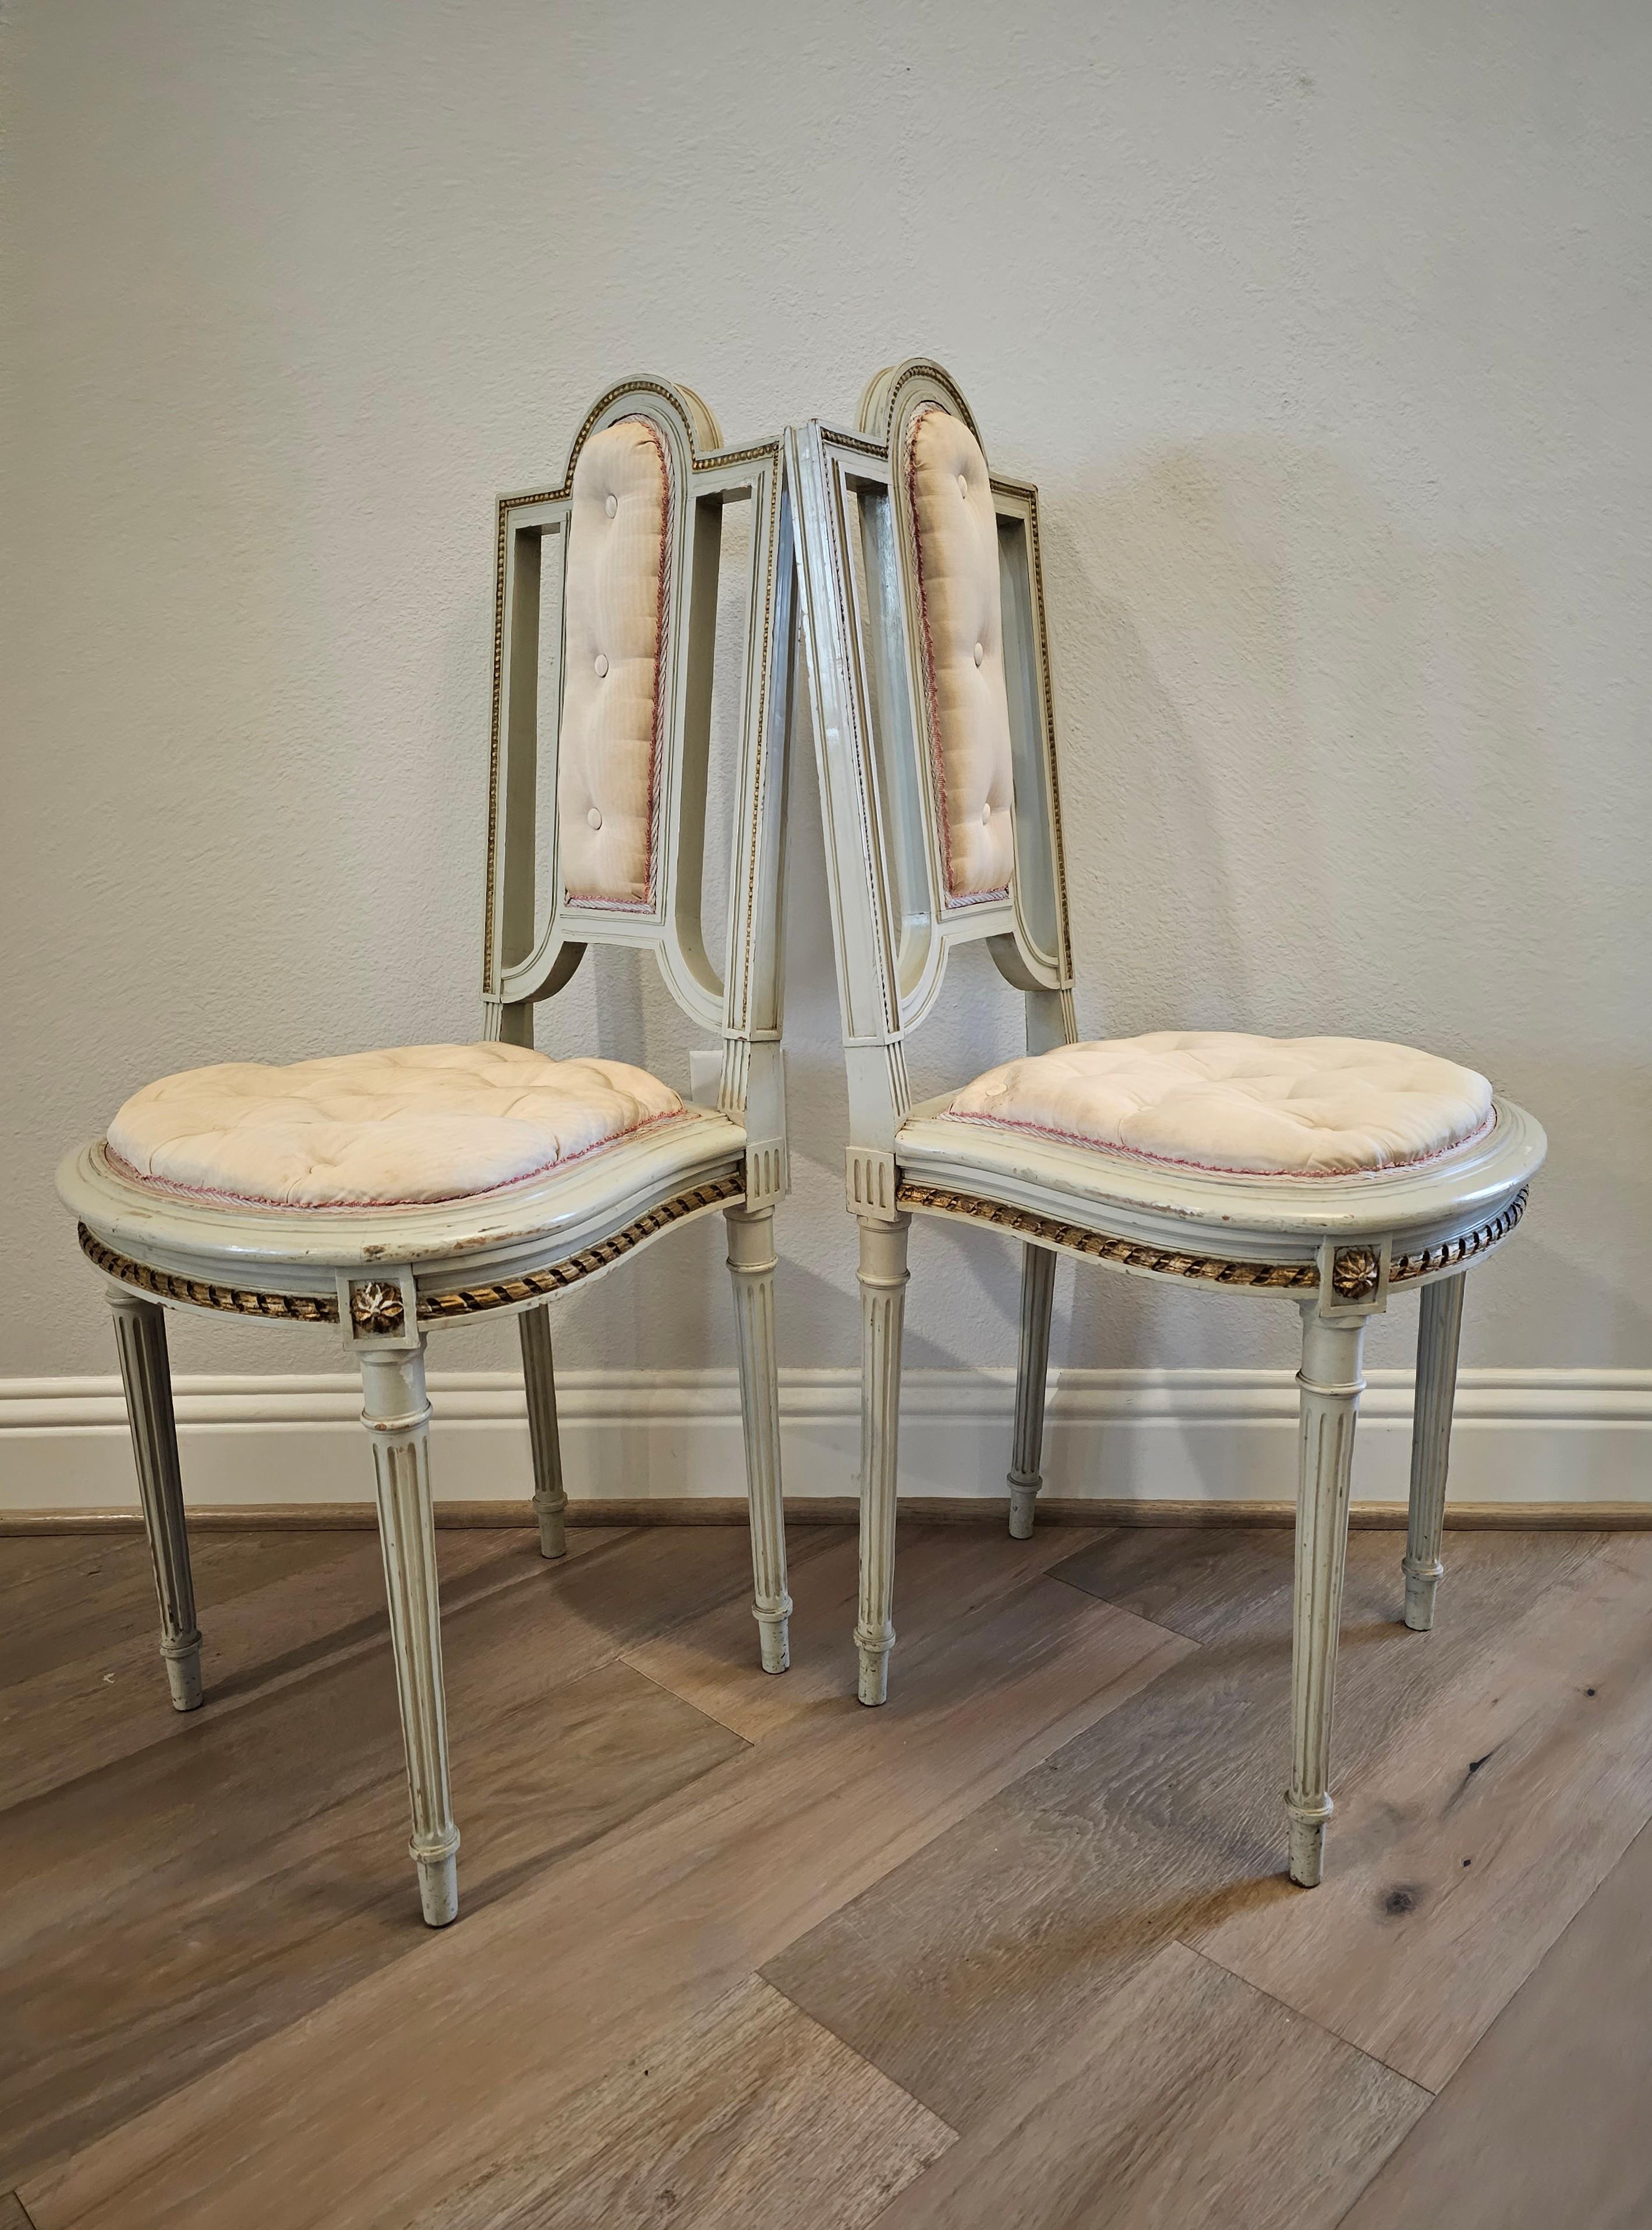 Pair of French Louis XVI Painted Parcel Gilt Petite Antique Chairs In Fair Condition For Sale In Forney, TX